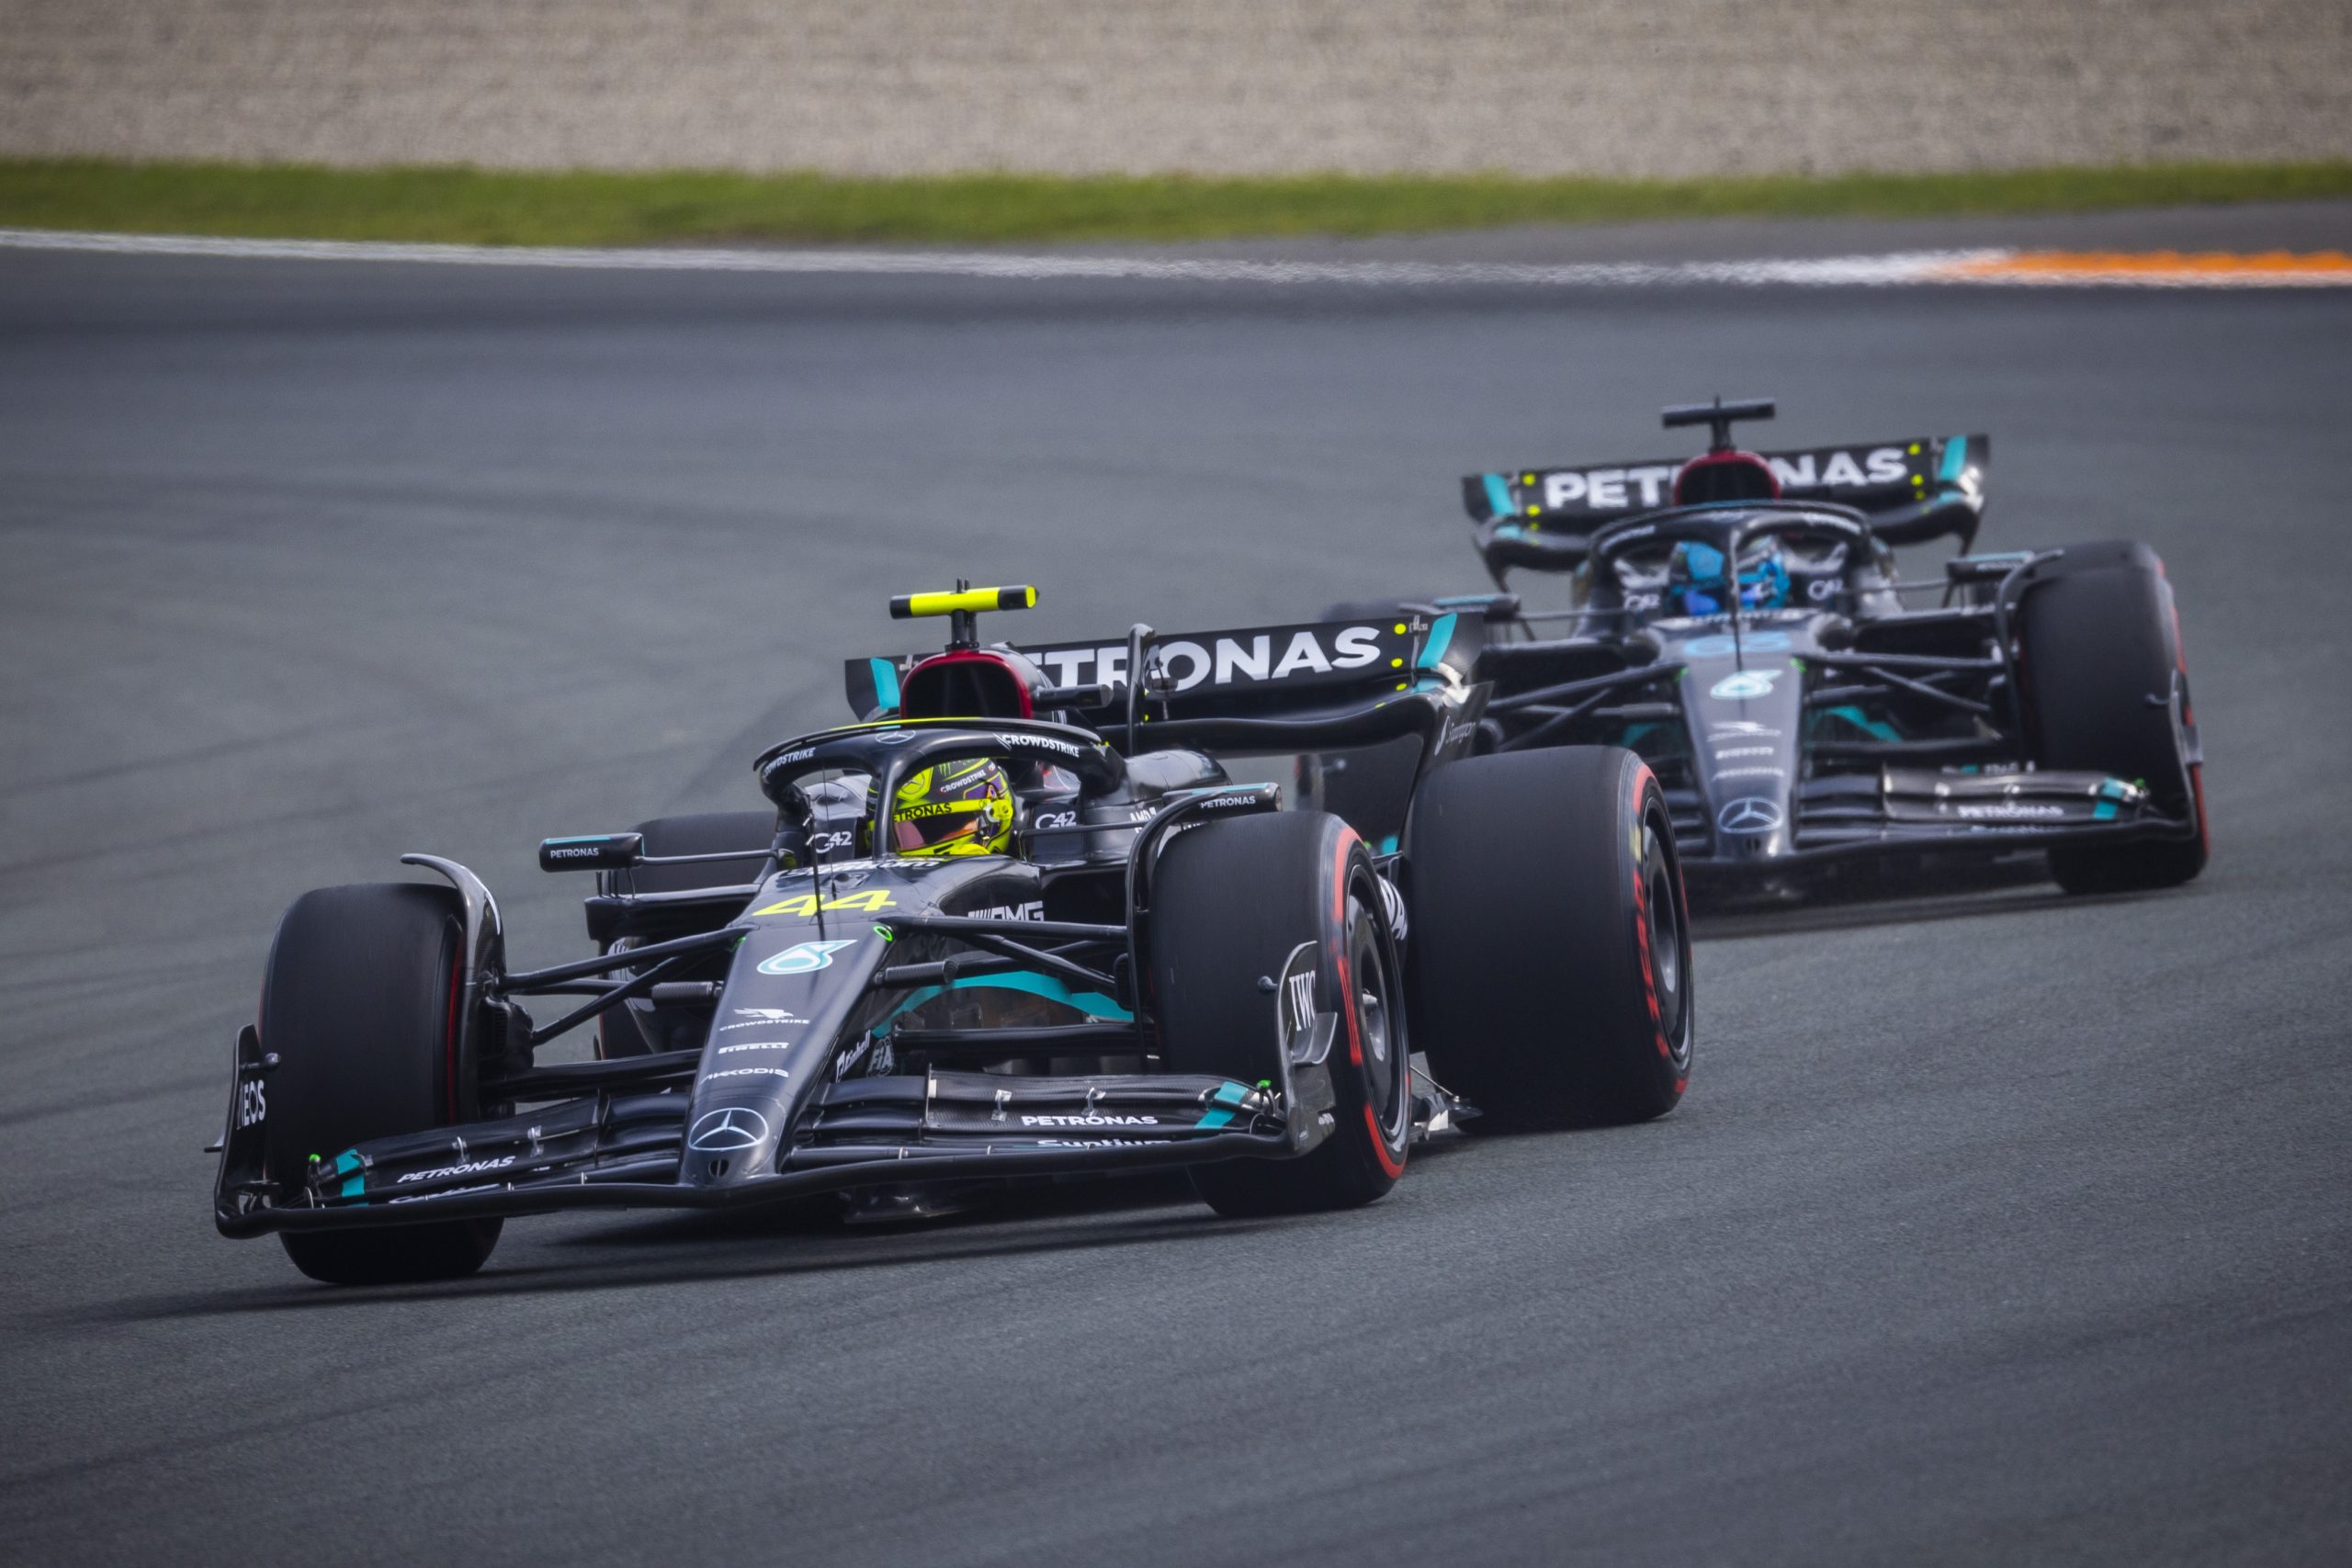 Lewis Hamilton & George Russell for Mercedes at the Dutch Grand Prix